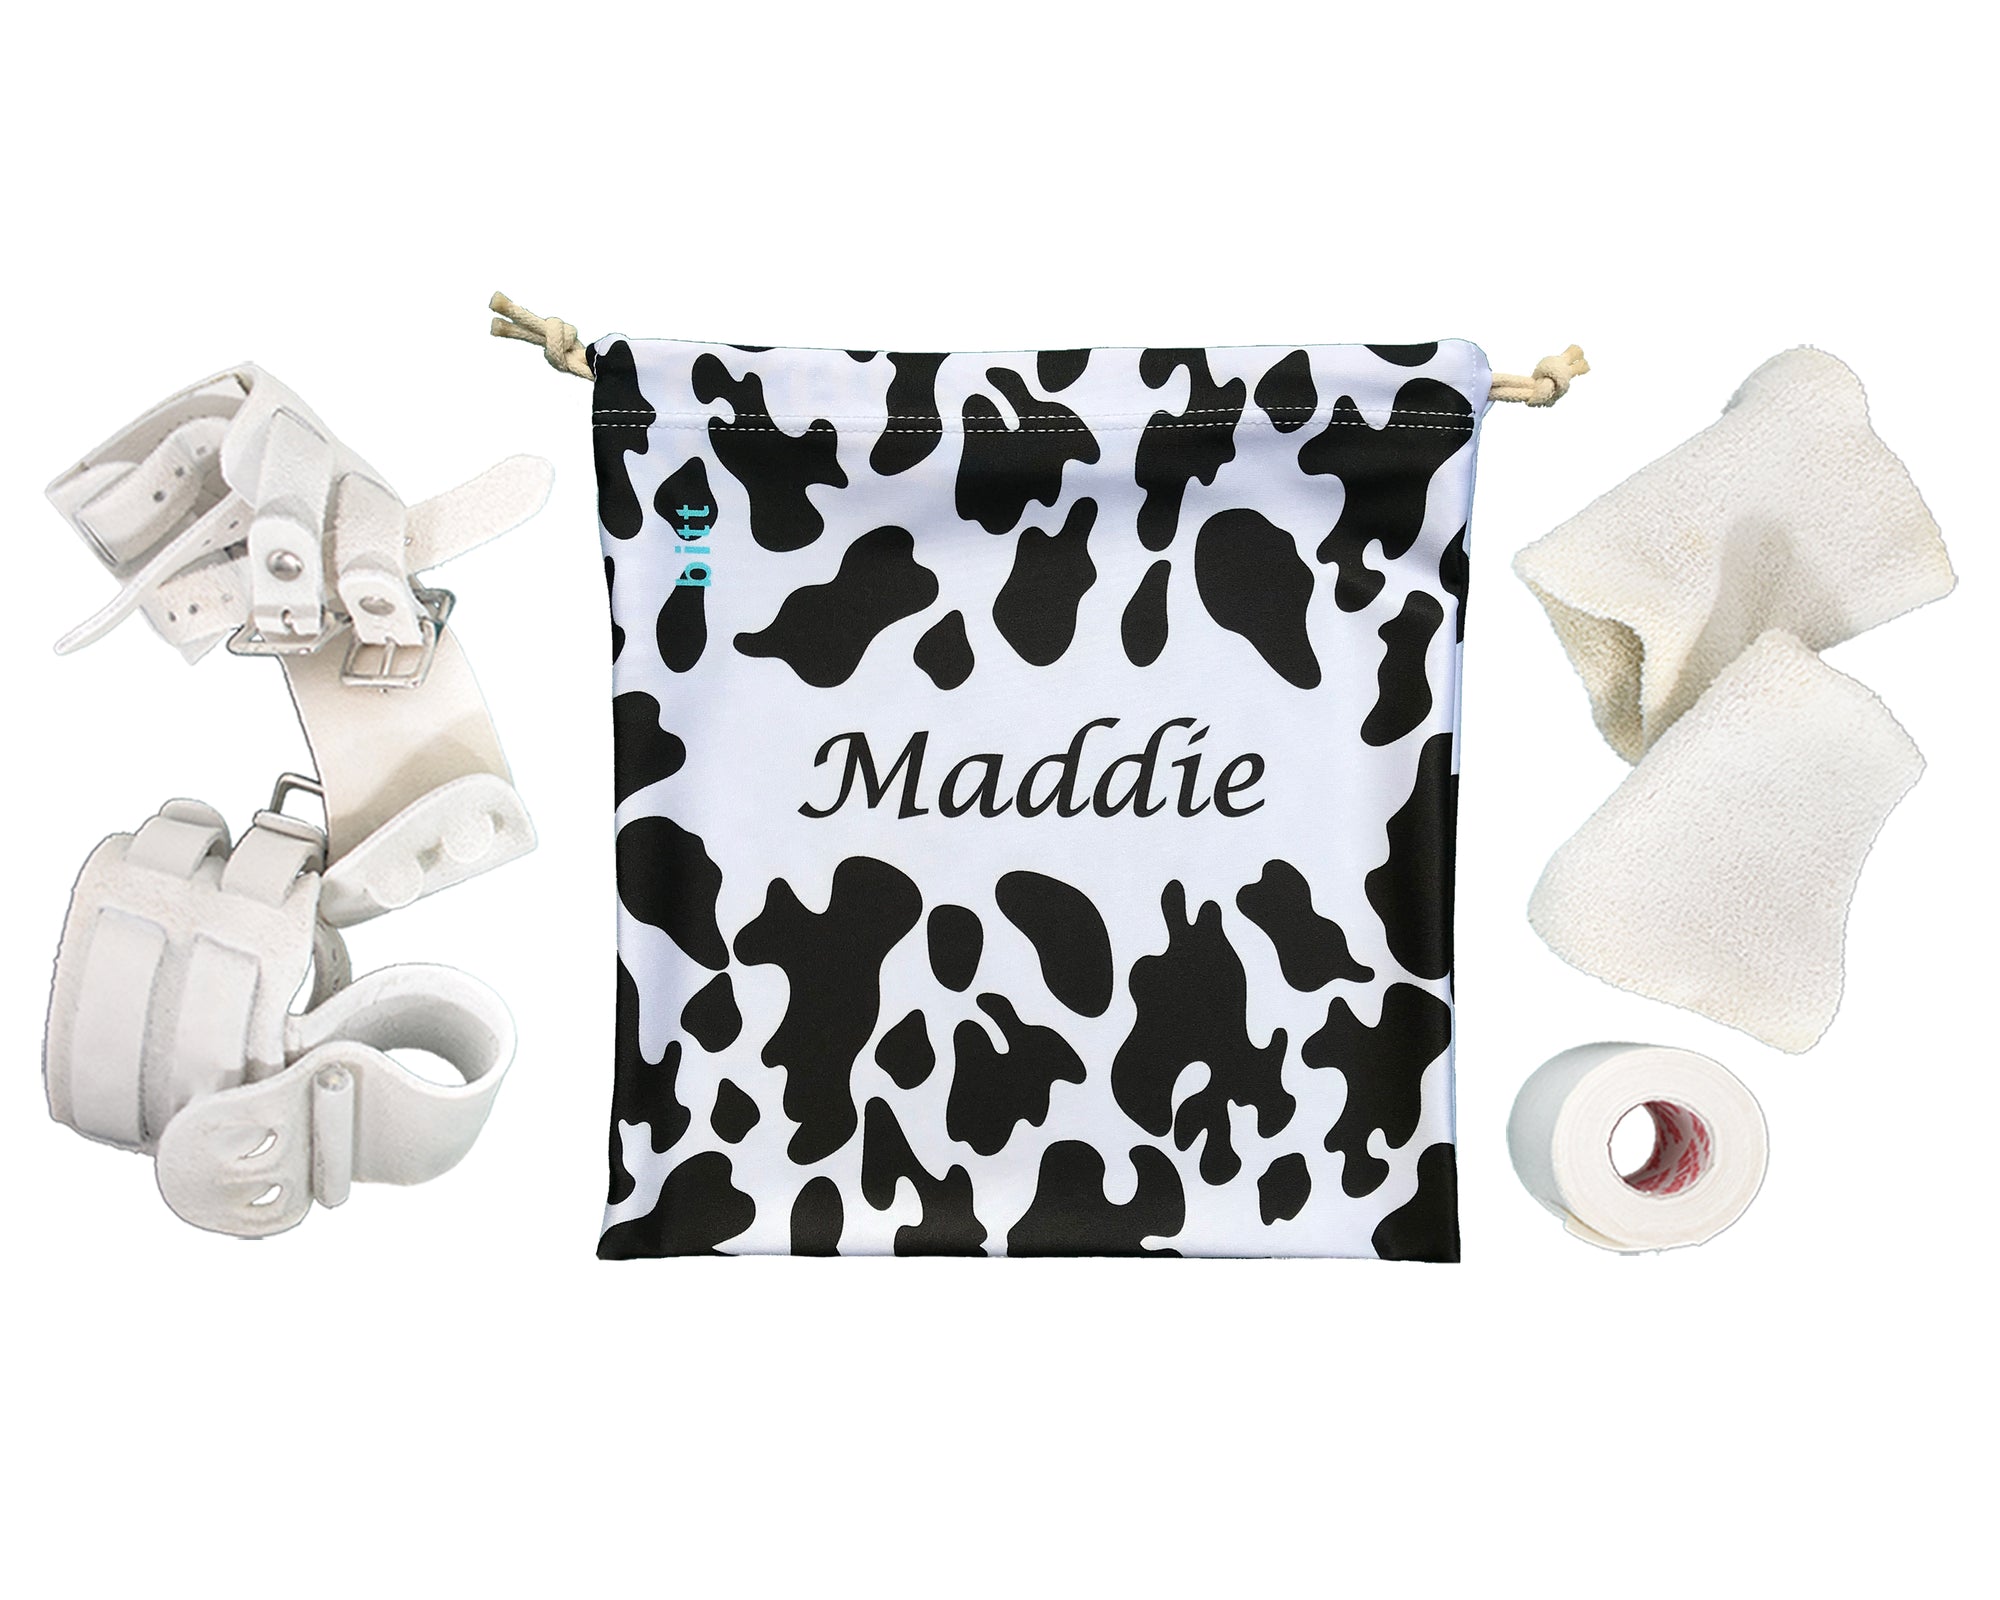 Personalized Gymnastics Grip Bag in Black & White Cow Print